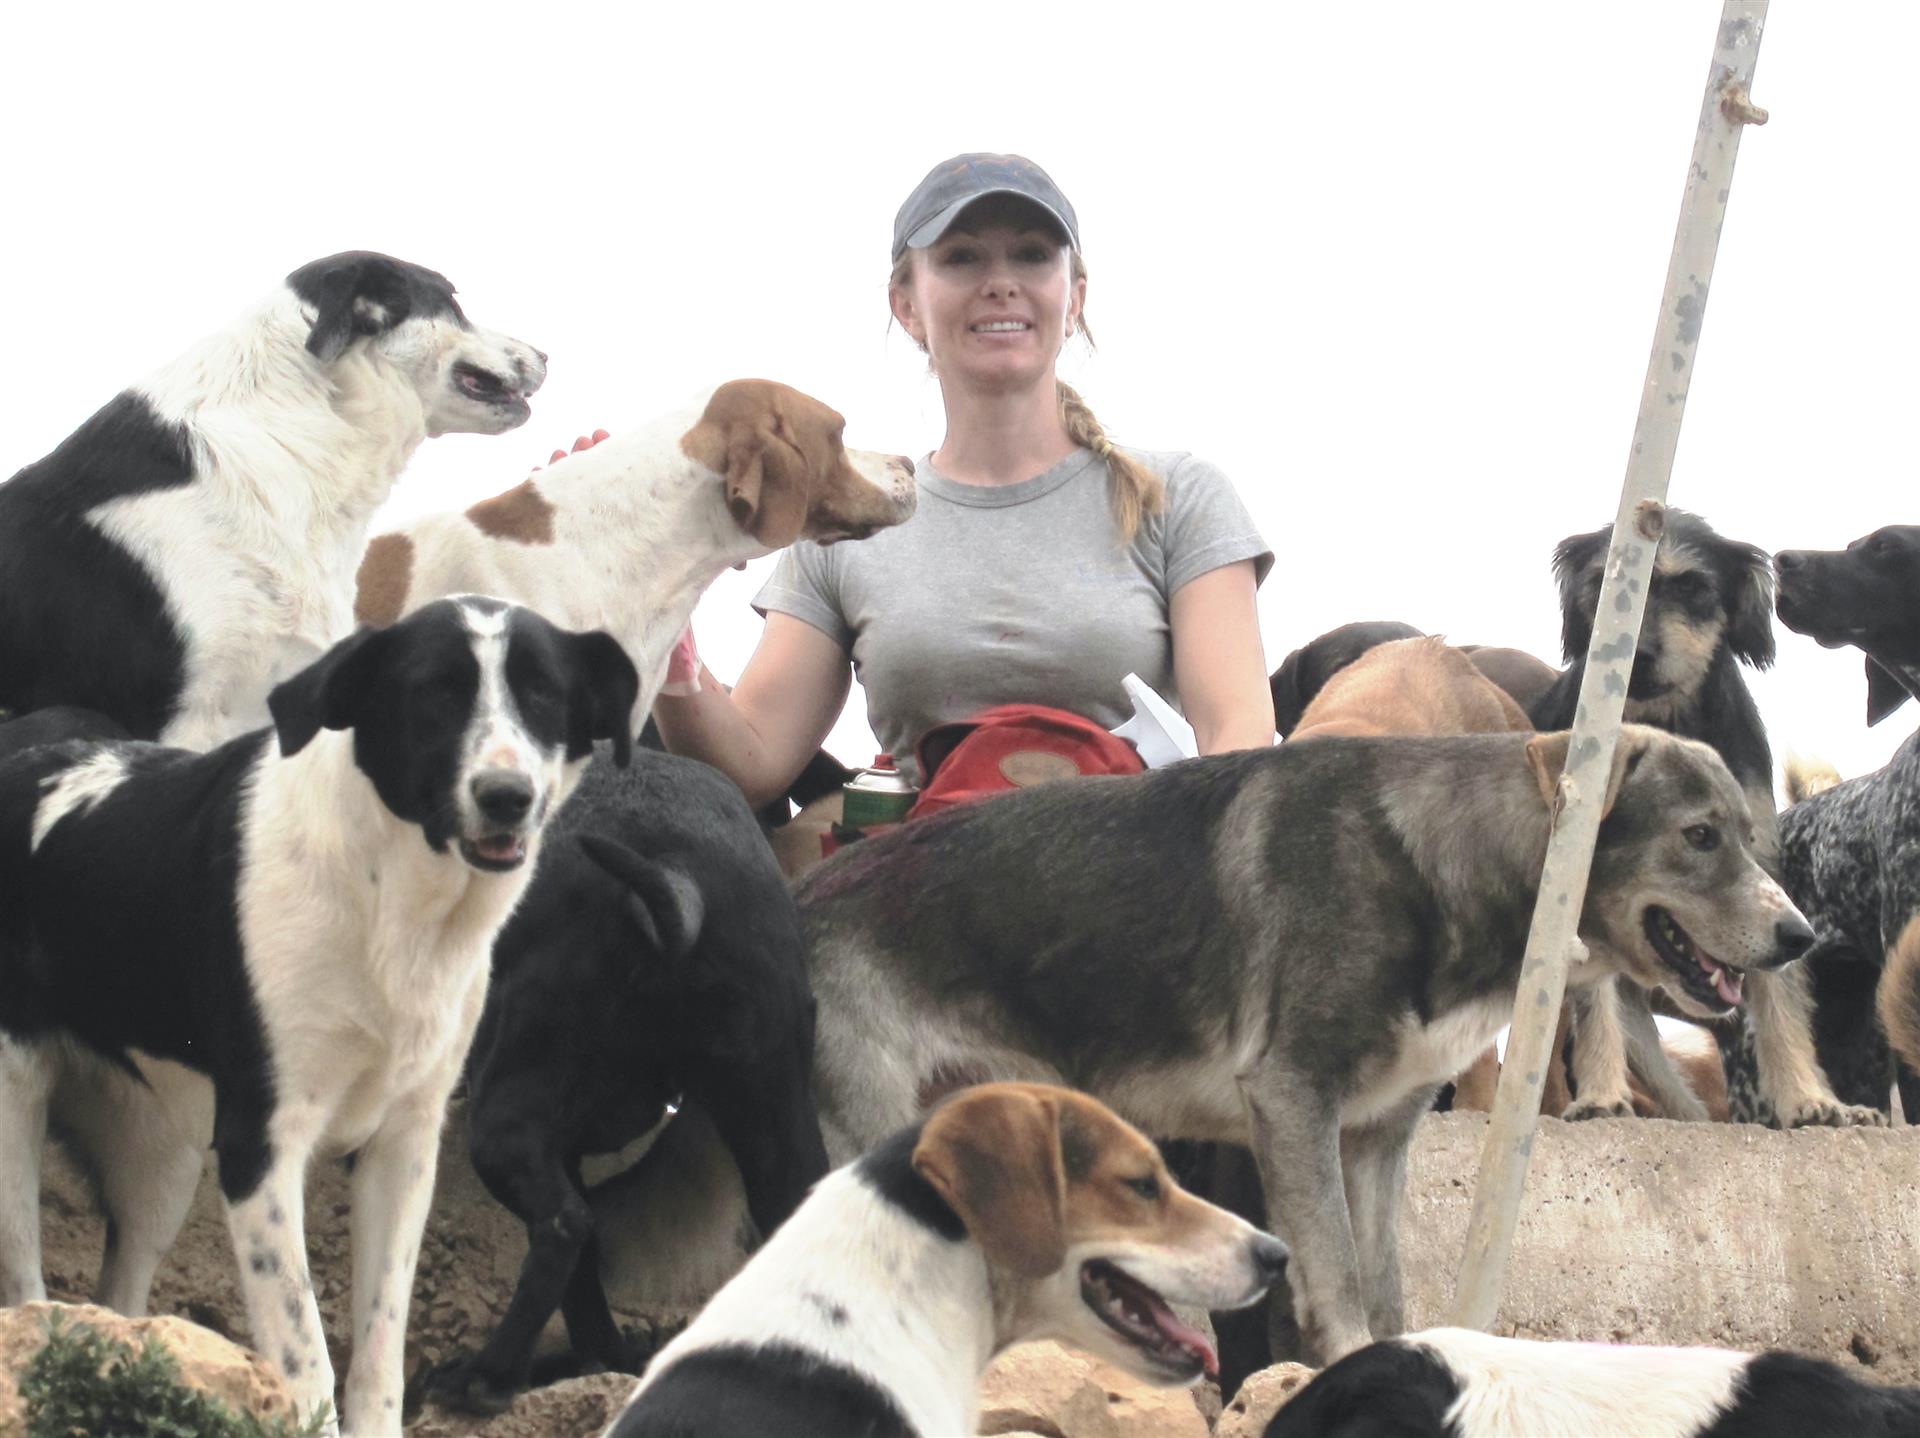 Susy Utzinger - A Life For Animal Welfare